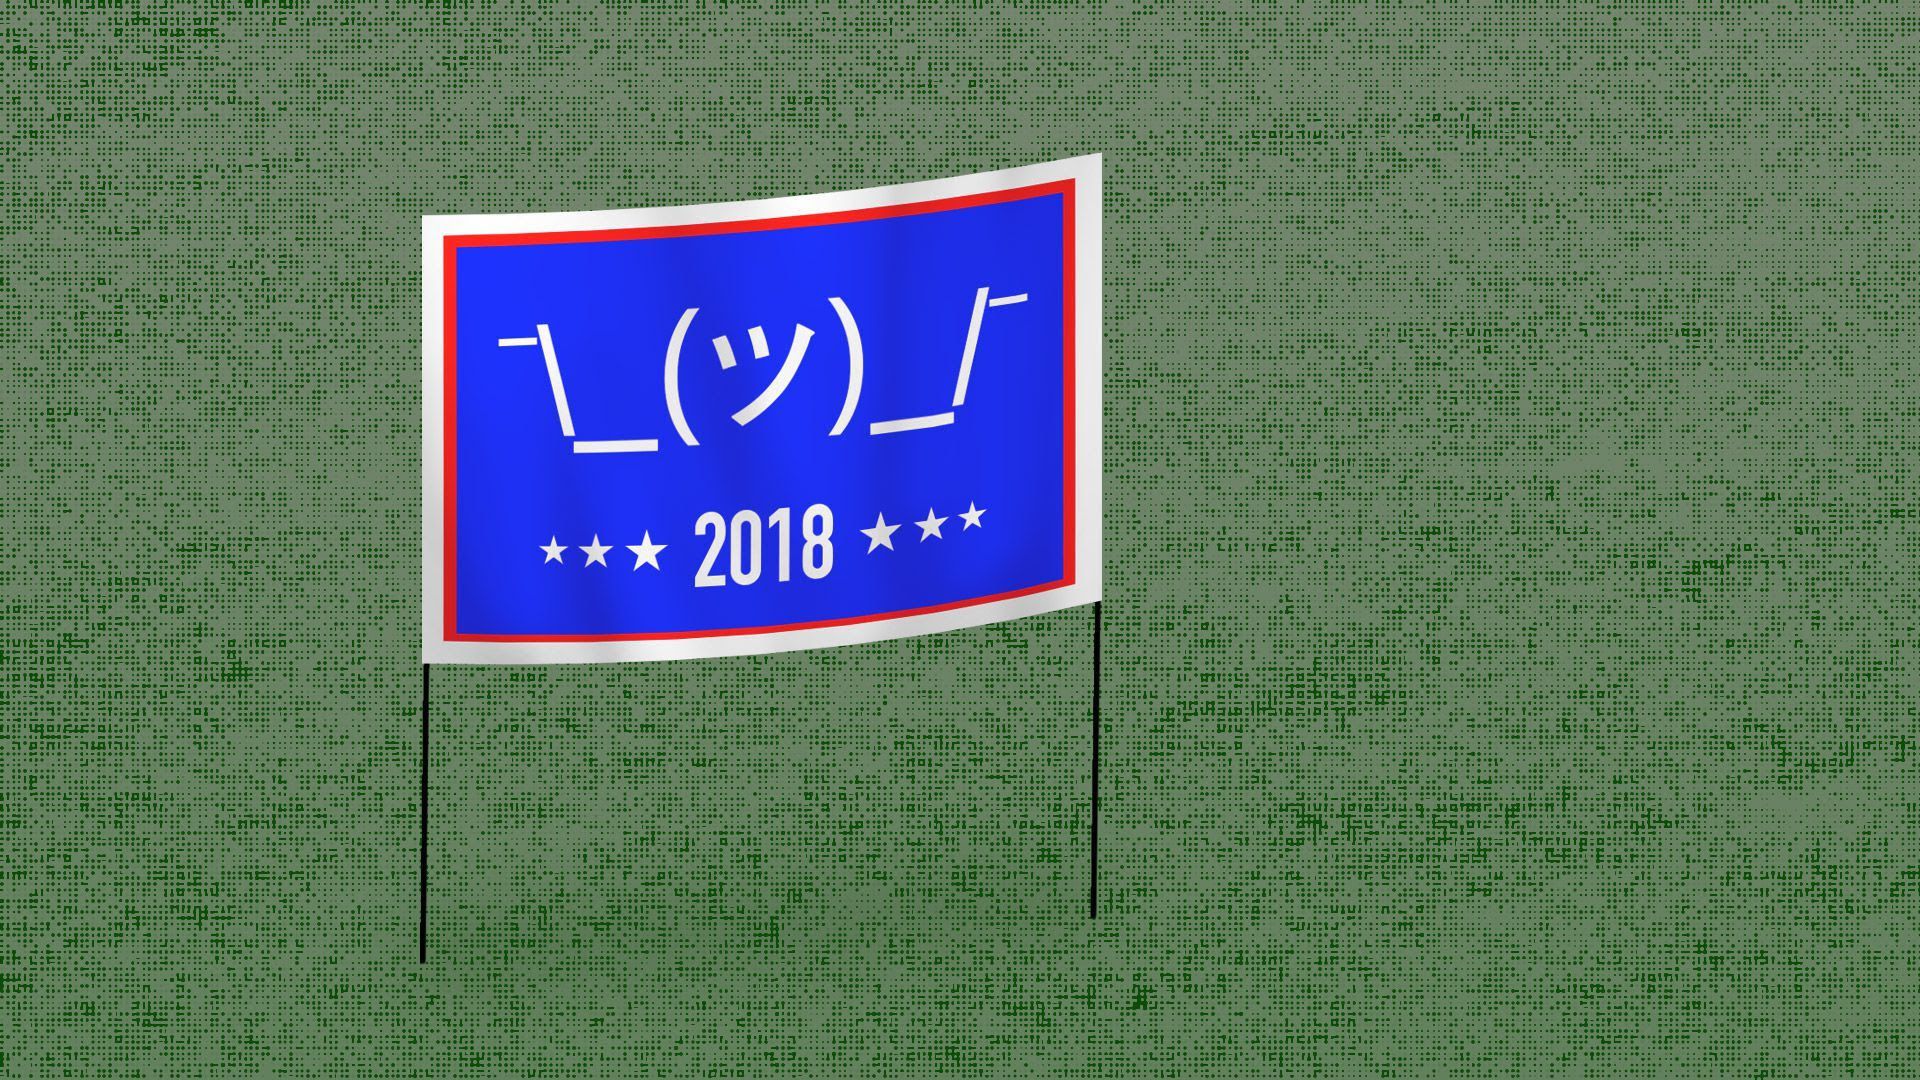 This shows a yard sign with a shruggie emoticon and 2018